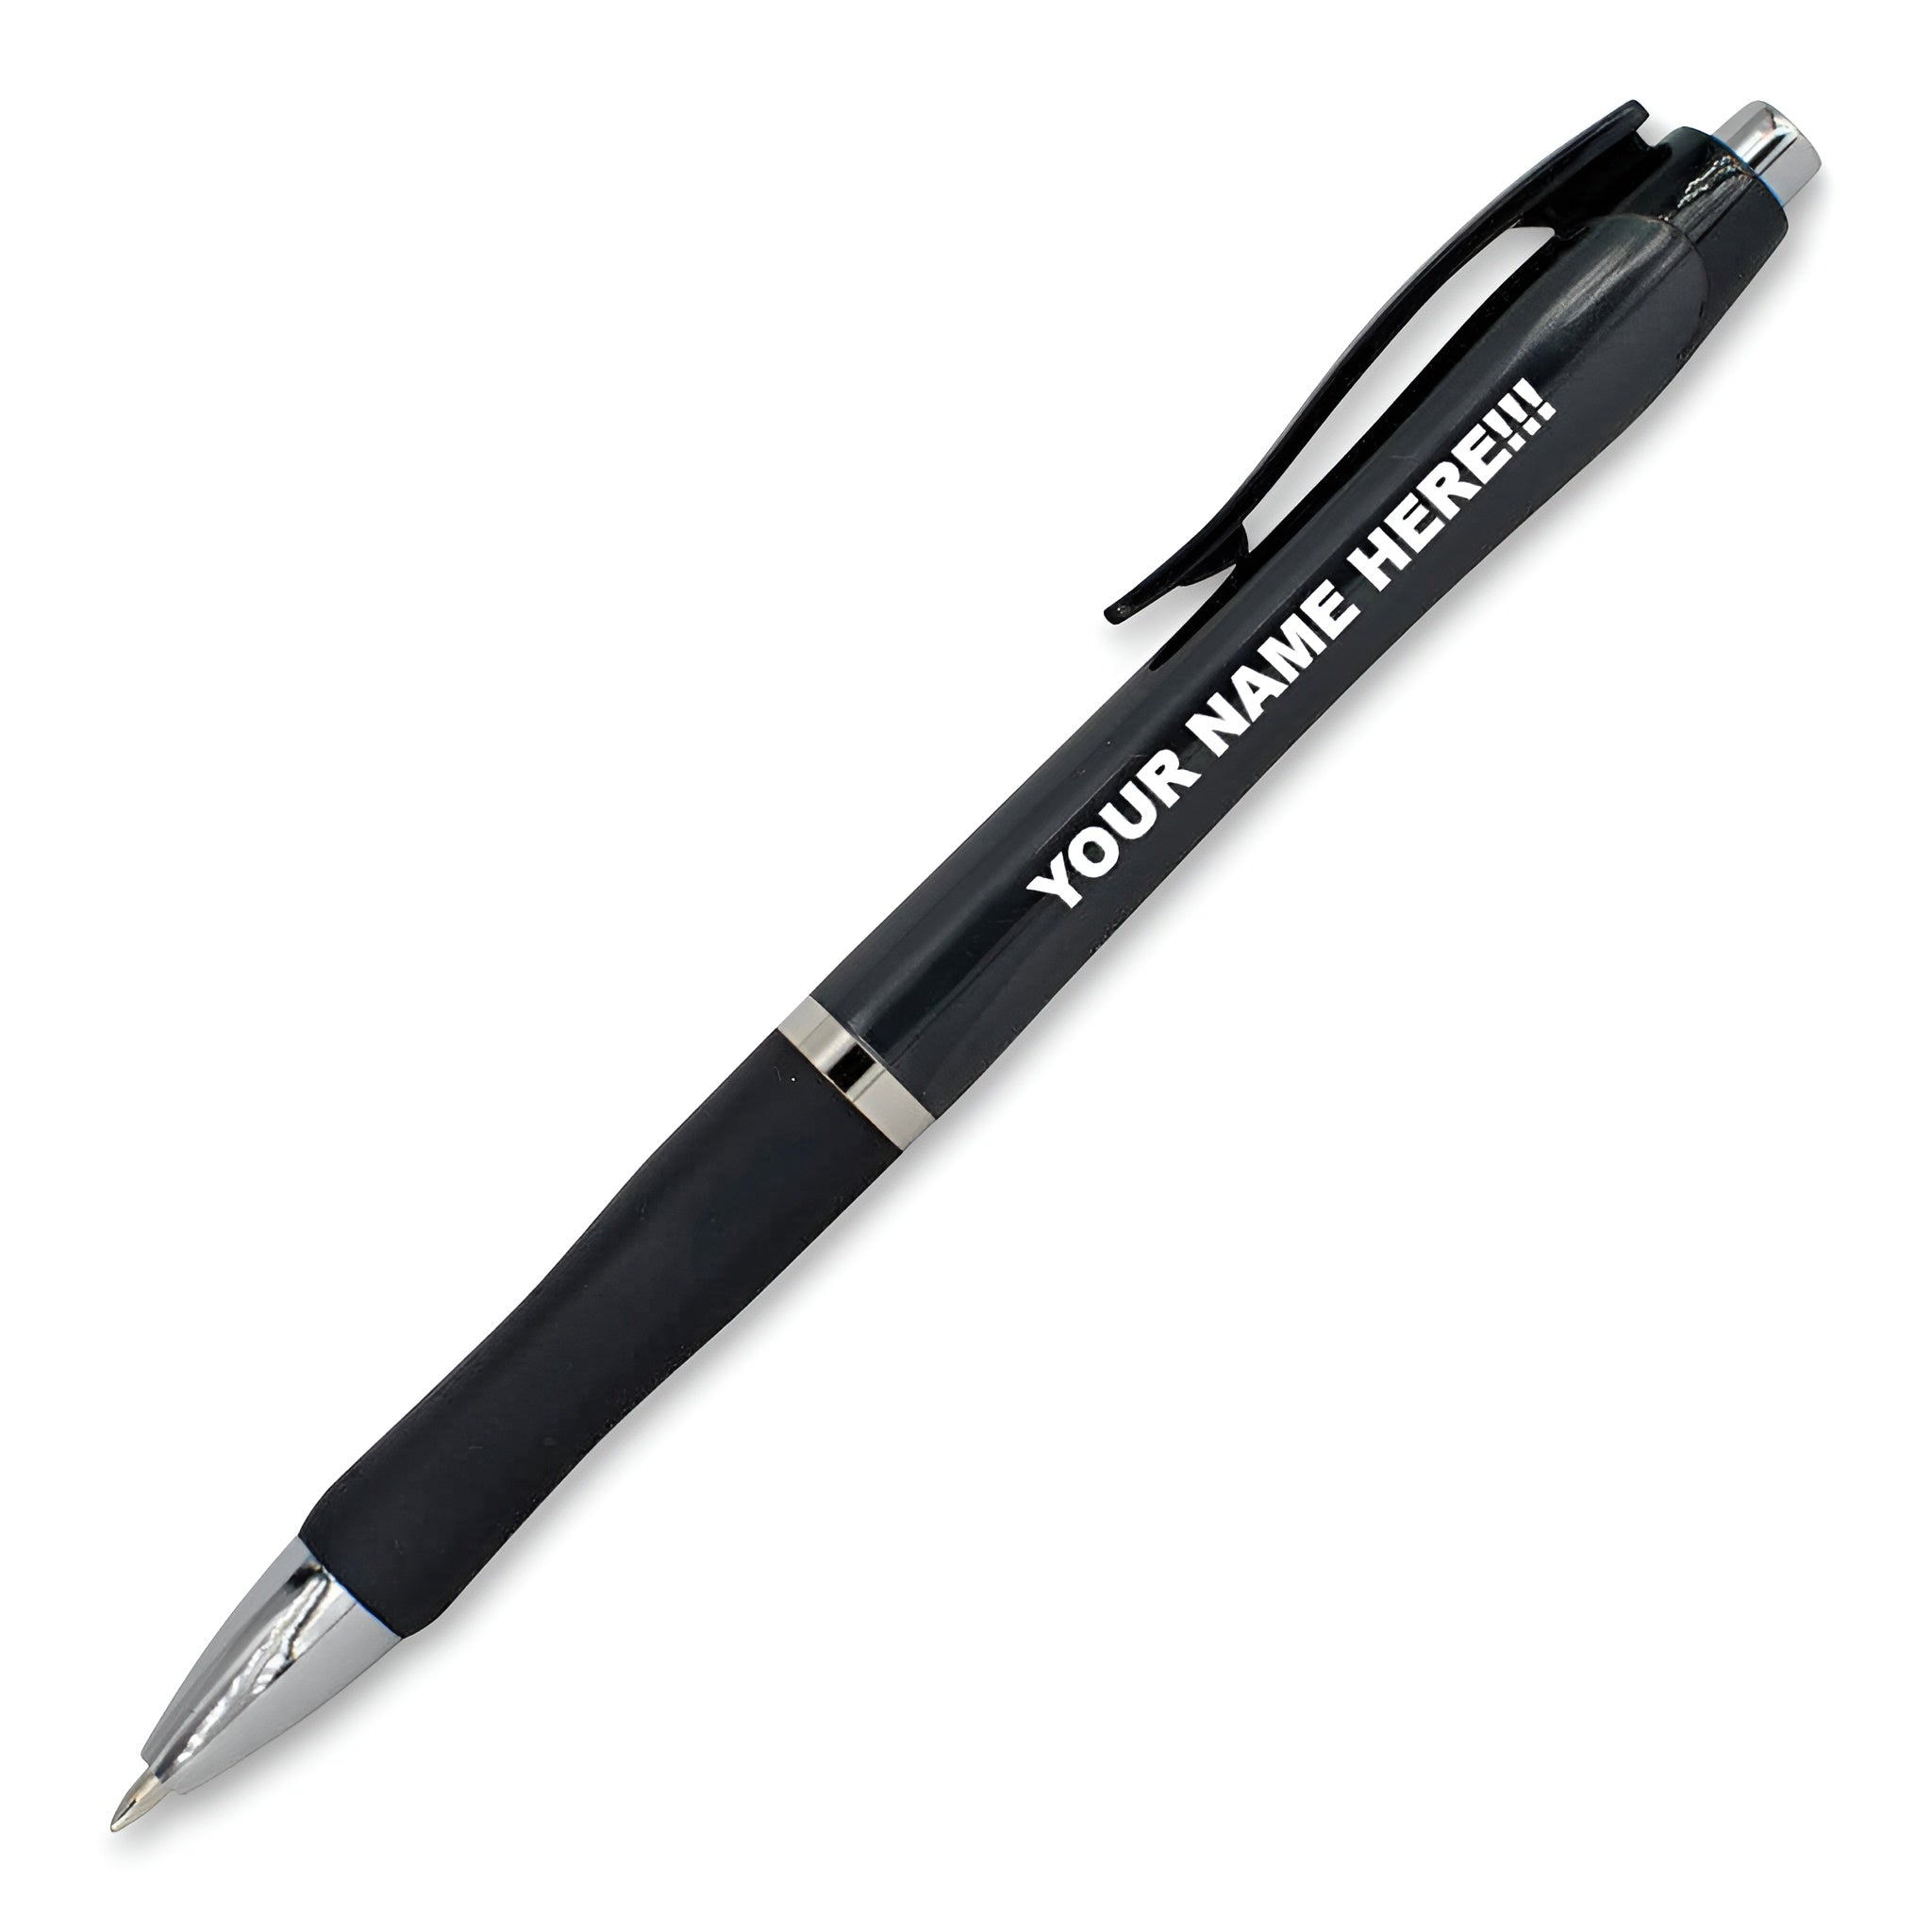 Quality Pens, Personalized – Buy Online with Express Delivery